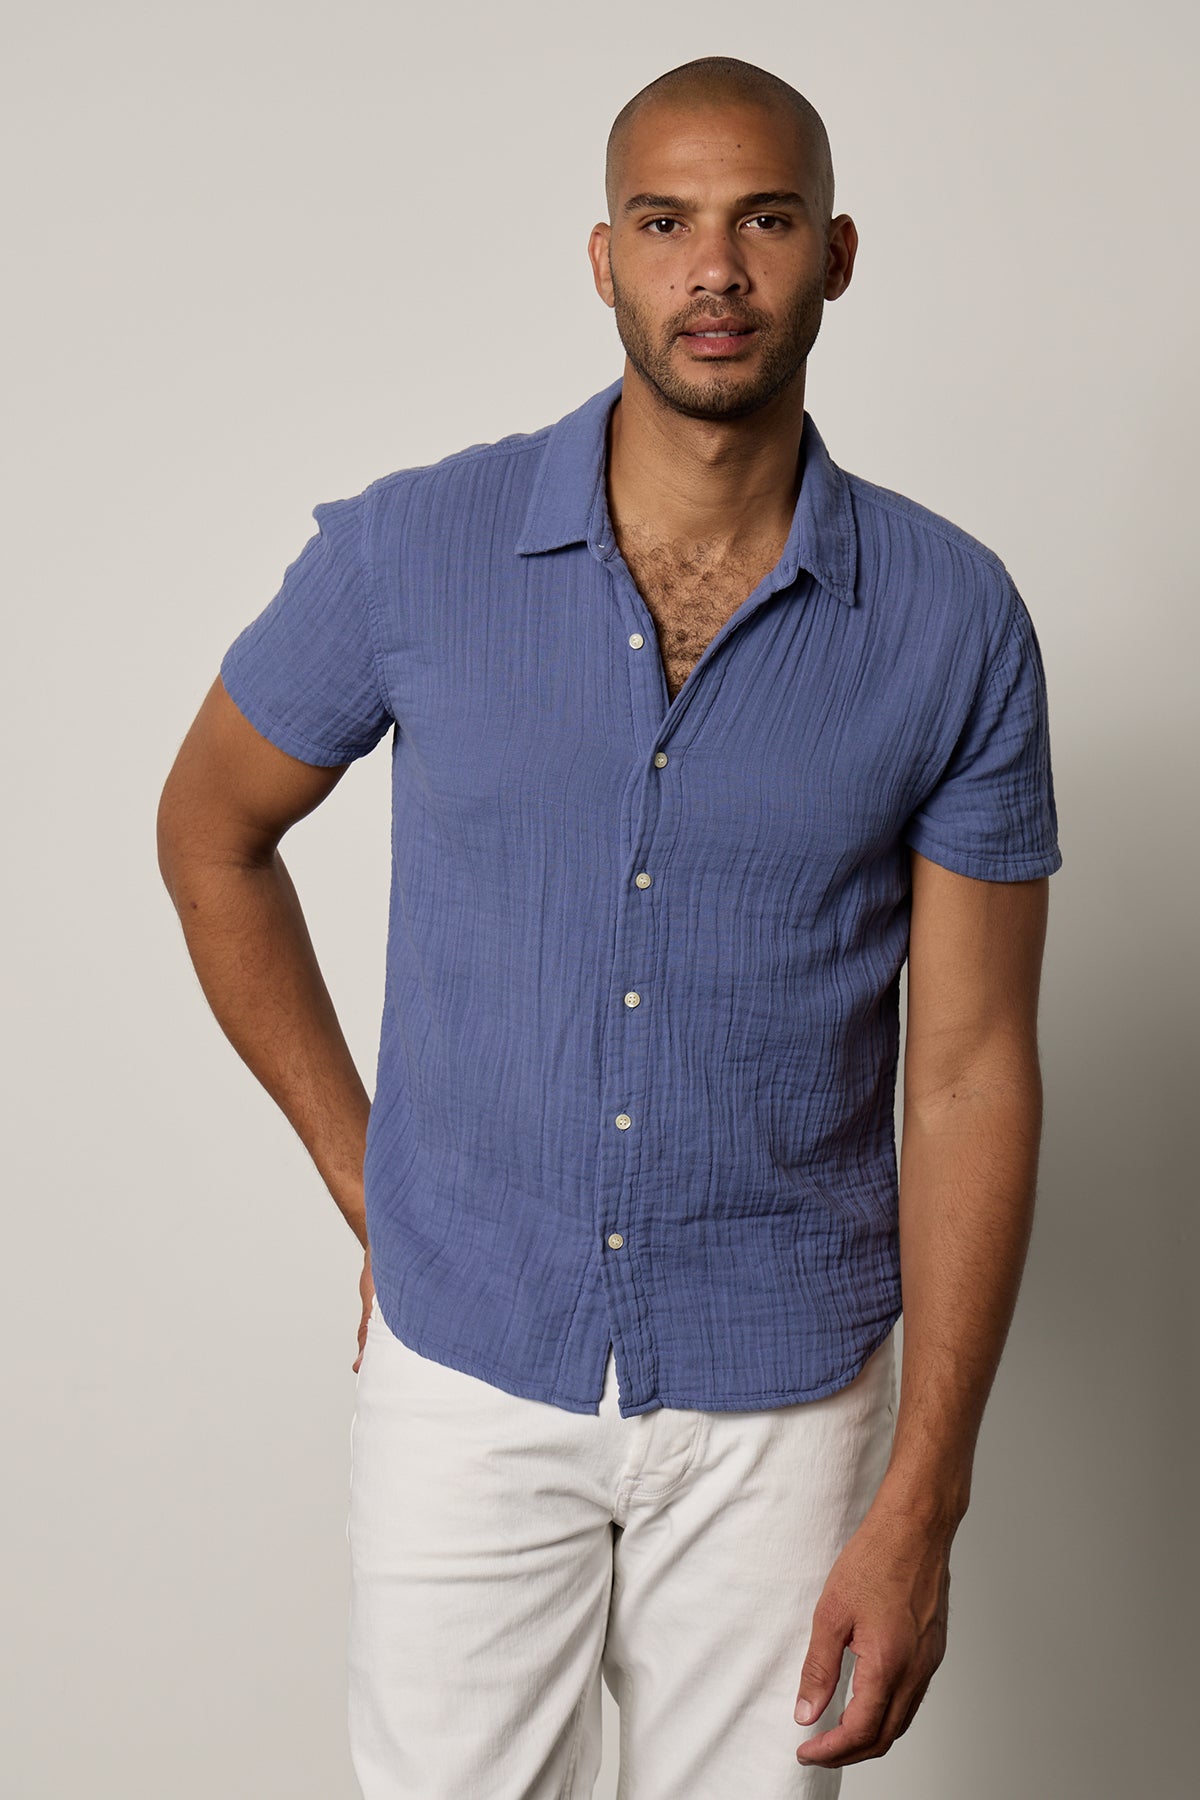 Christian Shirt in citadel blue with white denim front-26266328367297